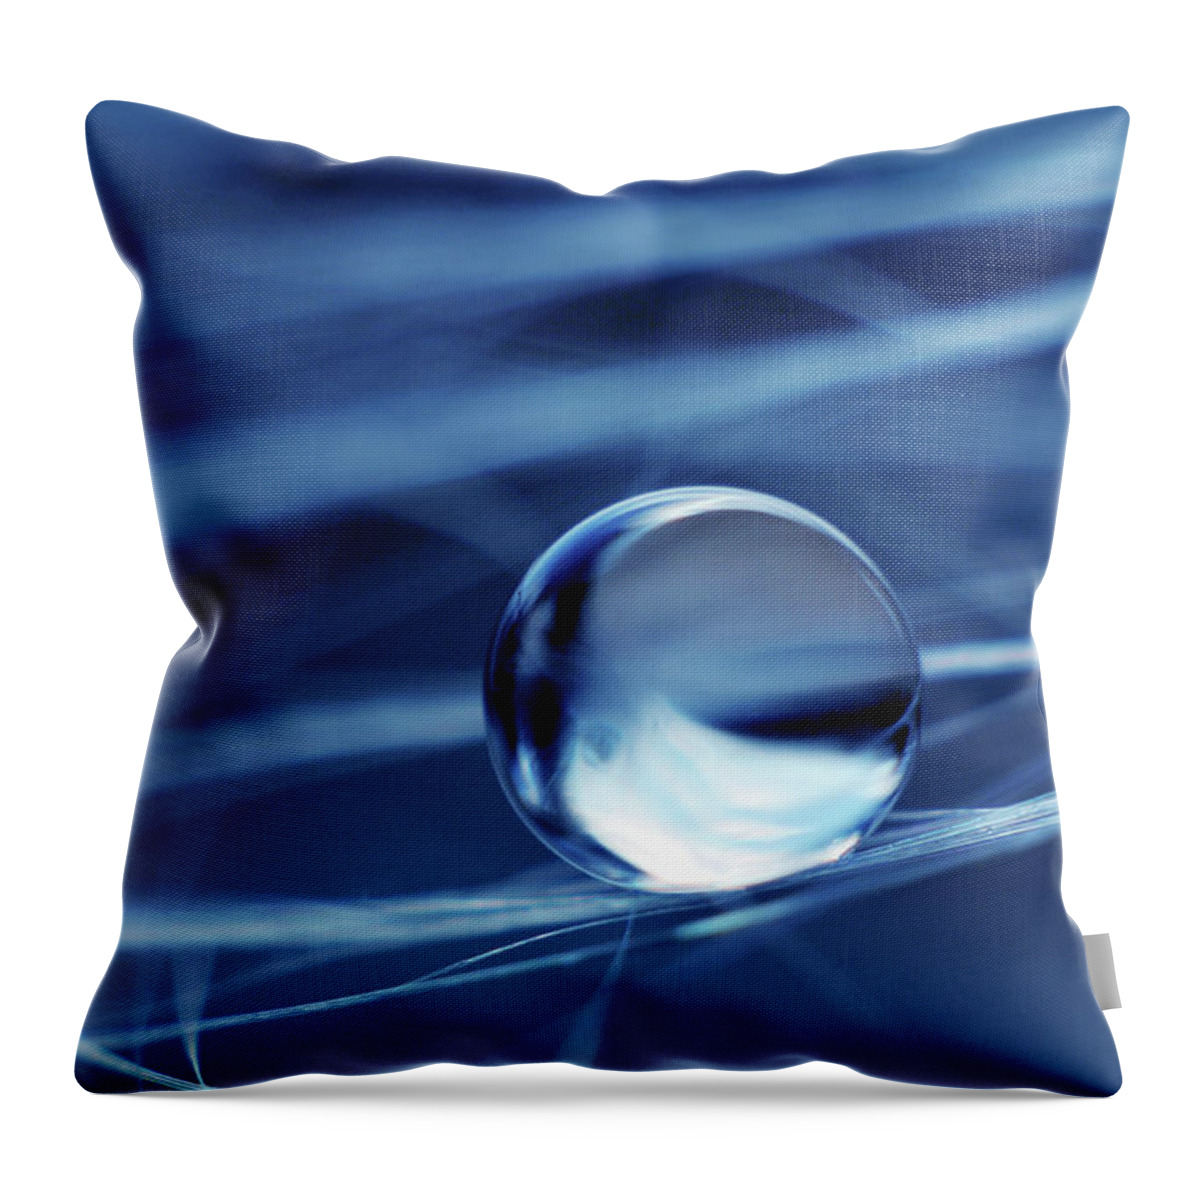 Blue Throw Pillow featuring the photograph Fresh Blue by Michelle Wermuth